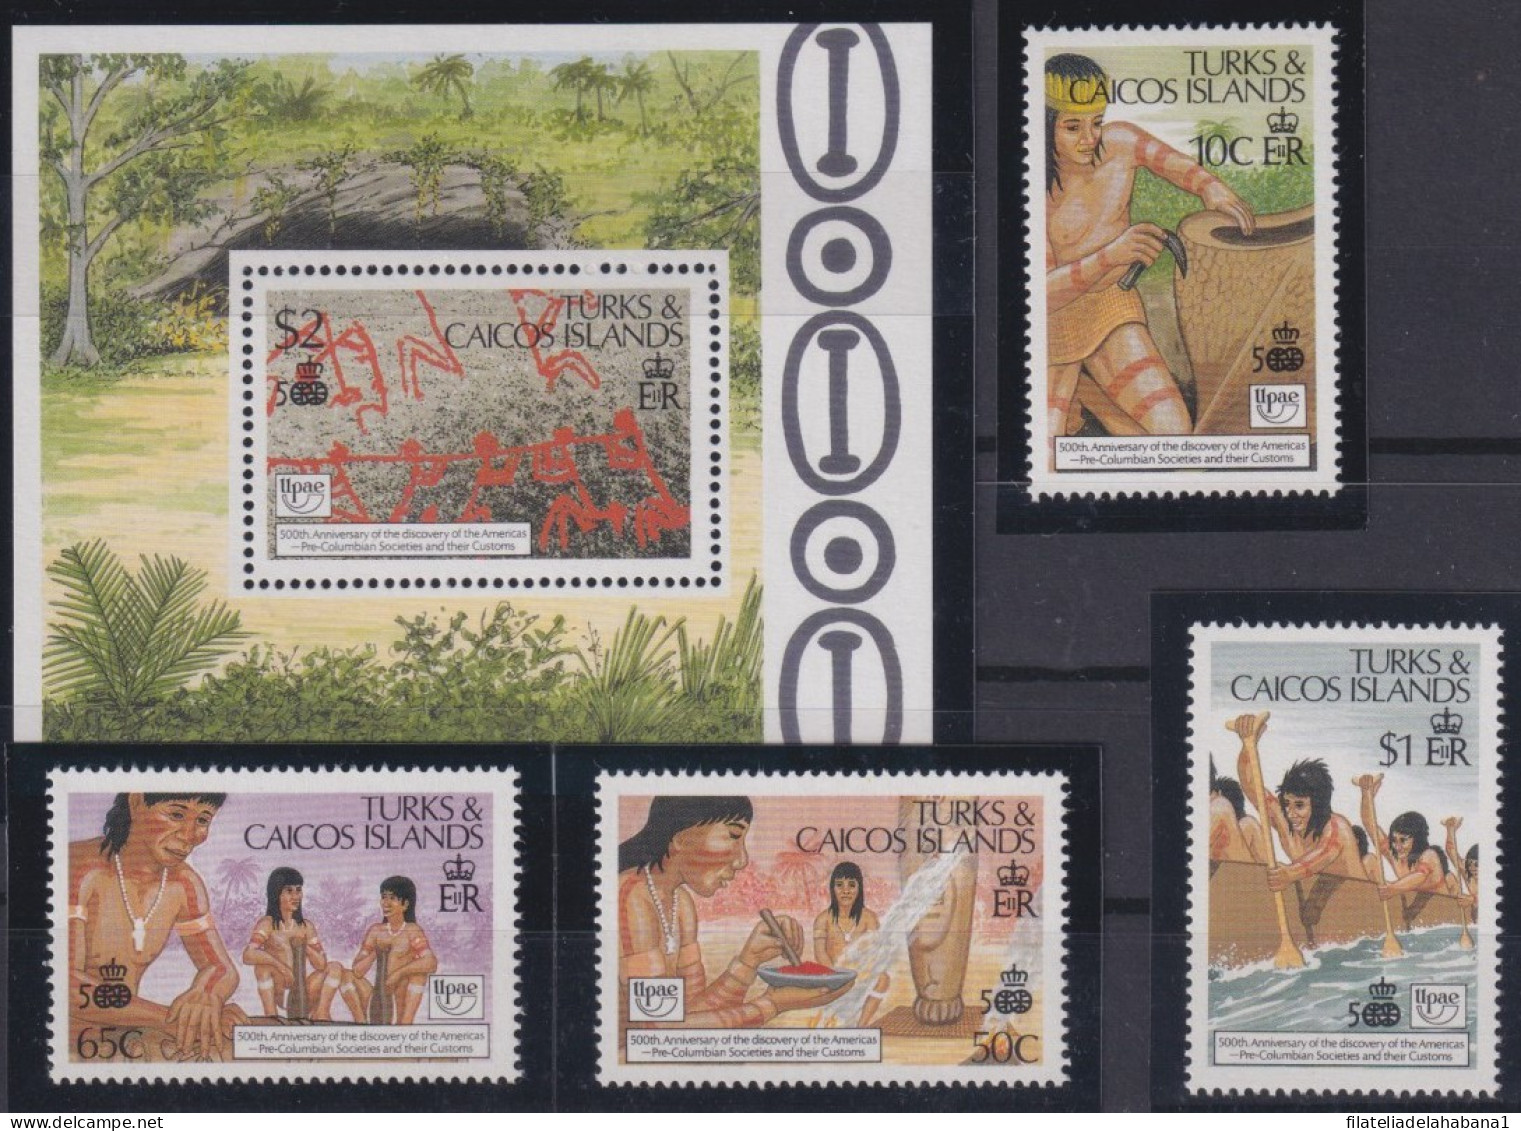 F-EX47589 TURKS & CAICOS MNH 1990 INDIAN ARCHEOLOGY PICTOGRAM DISCOVERY COLUMBUS.  - Christopher Columbus